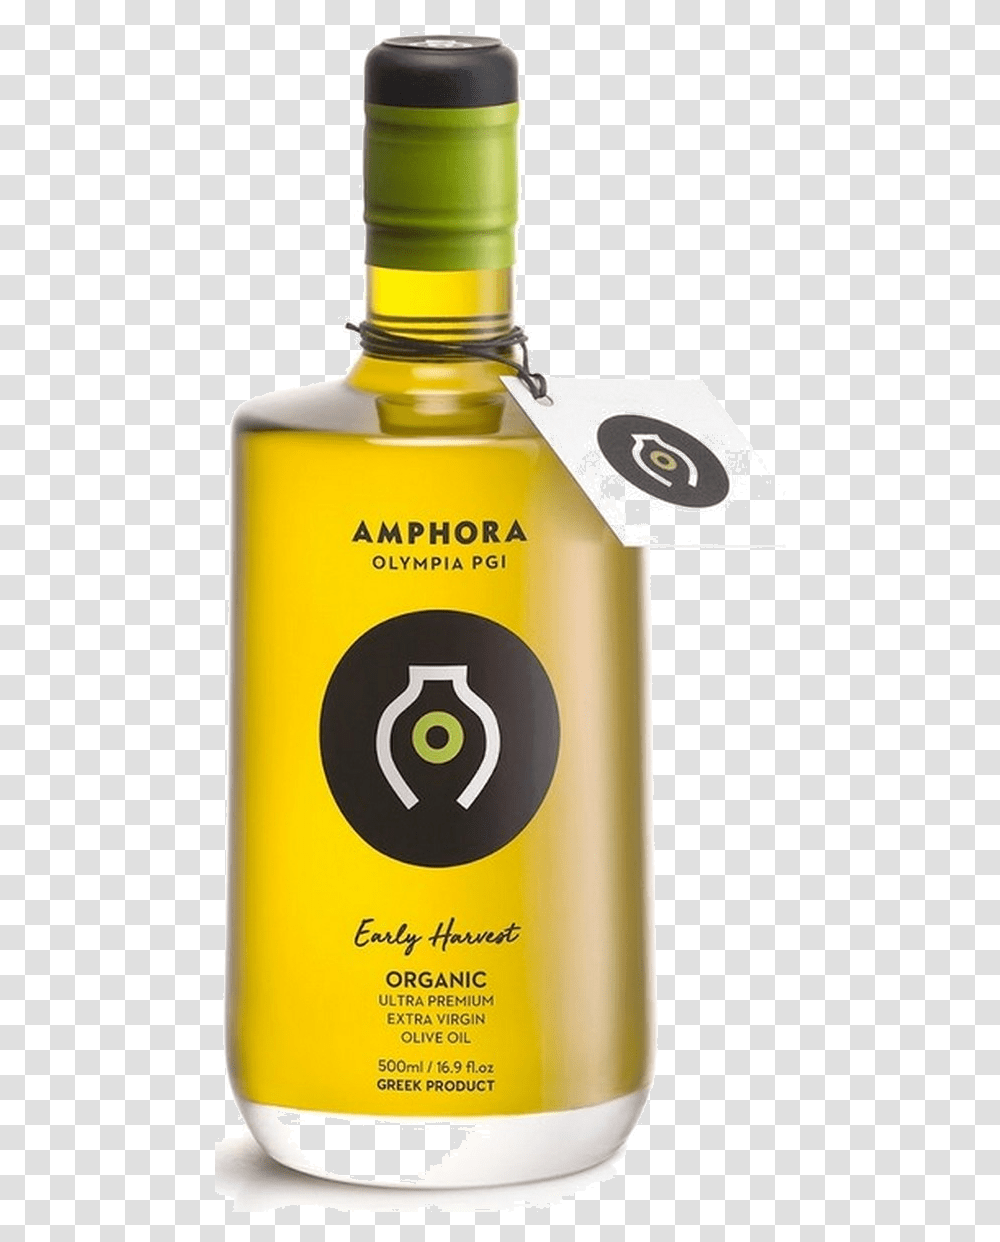 Amphora Olympia Organic Olive Oil, Bottle, Cosmetics, Perfume, Label Transparent Png